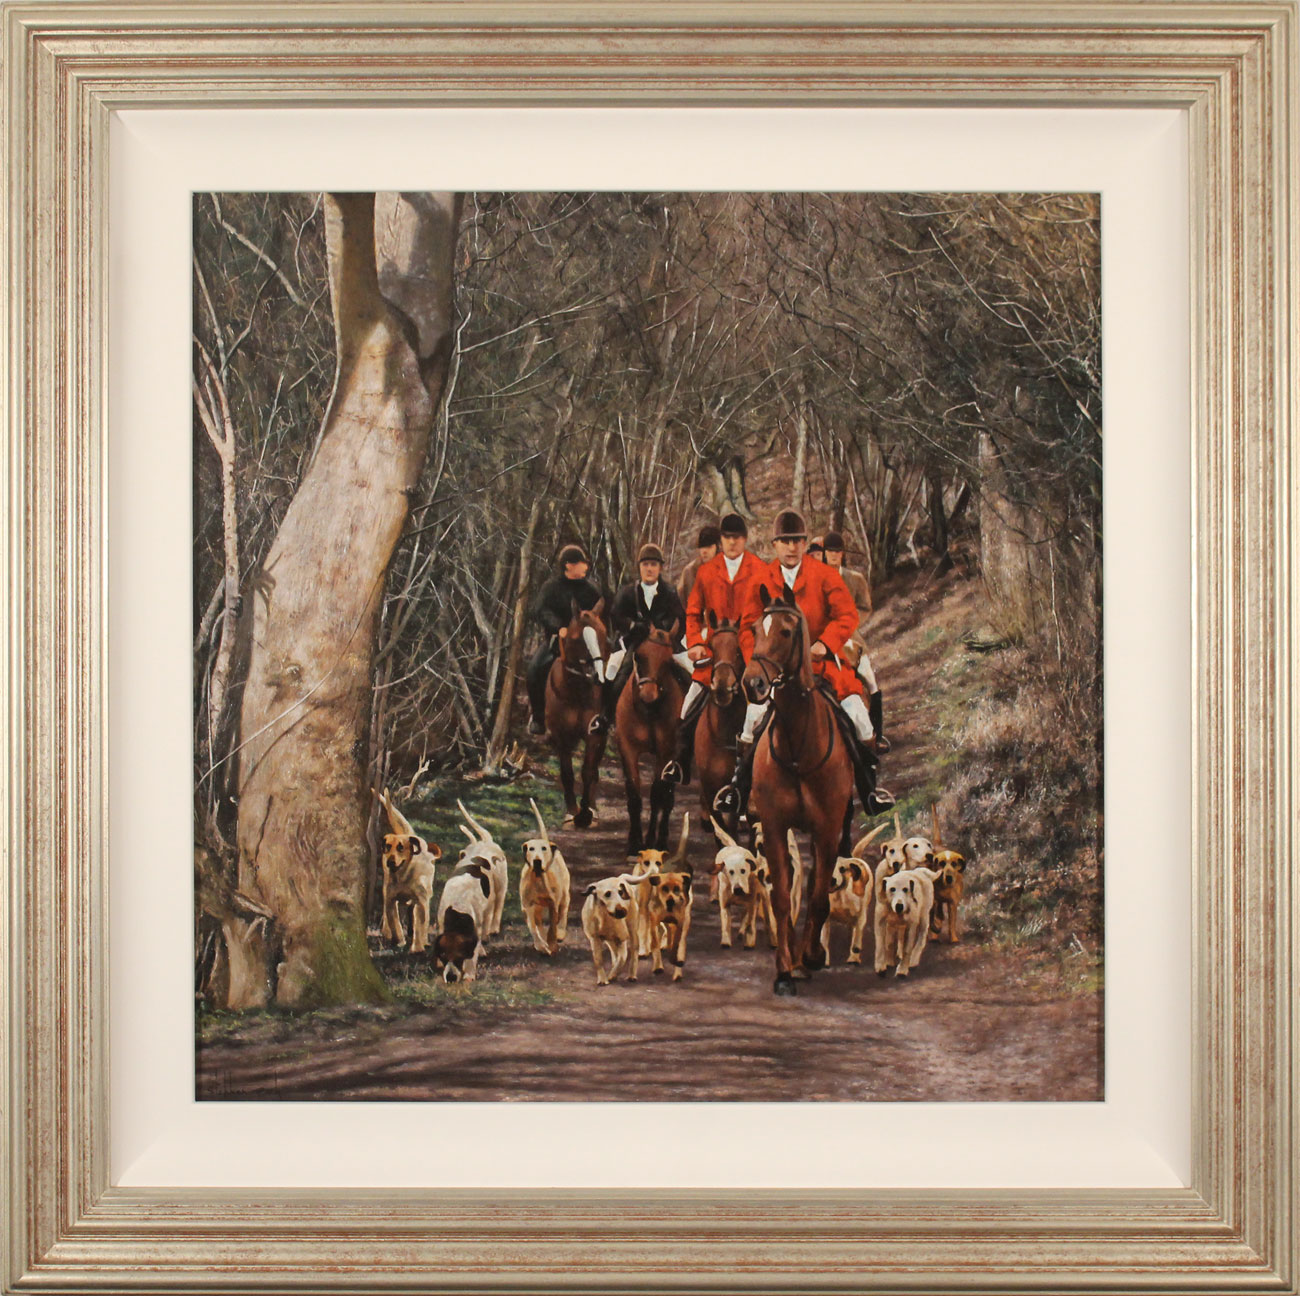 Stephen Park, Original oil painting on panel, The Hunt. Click to enlarge